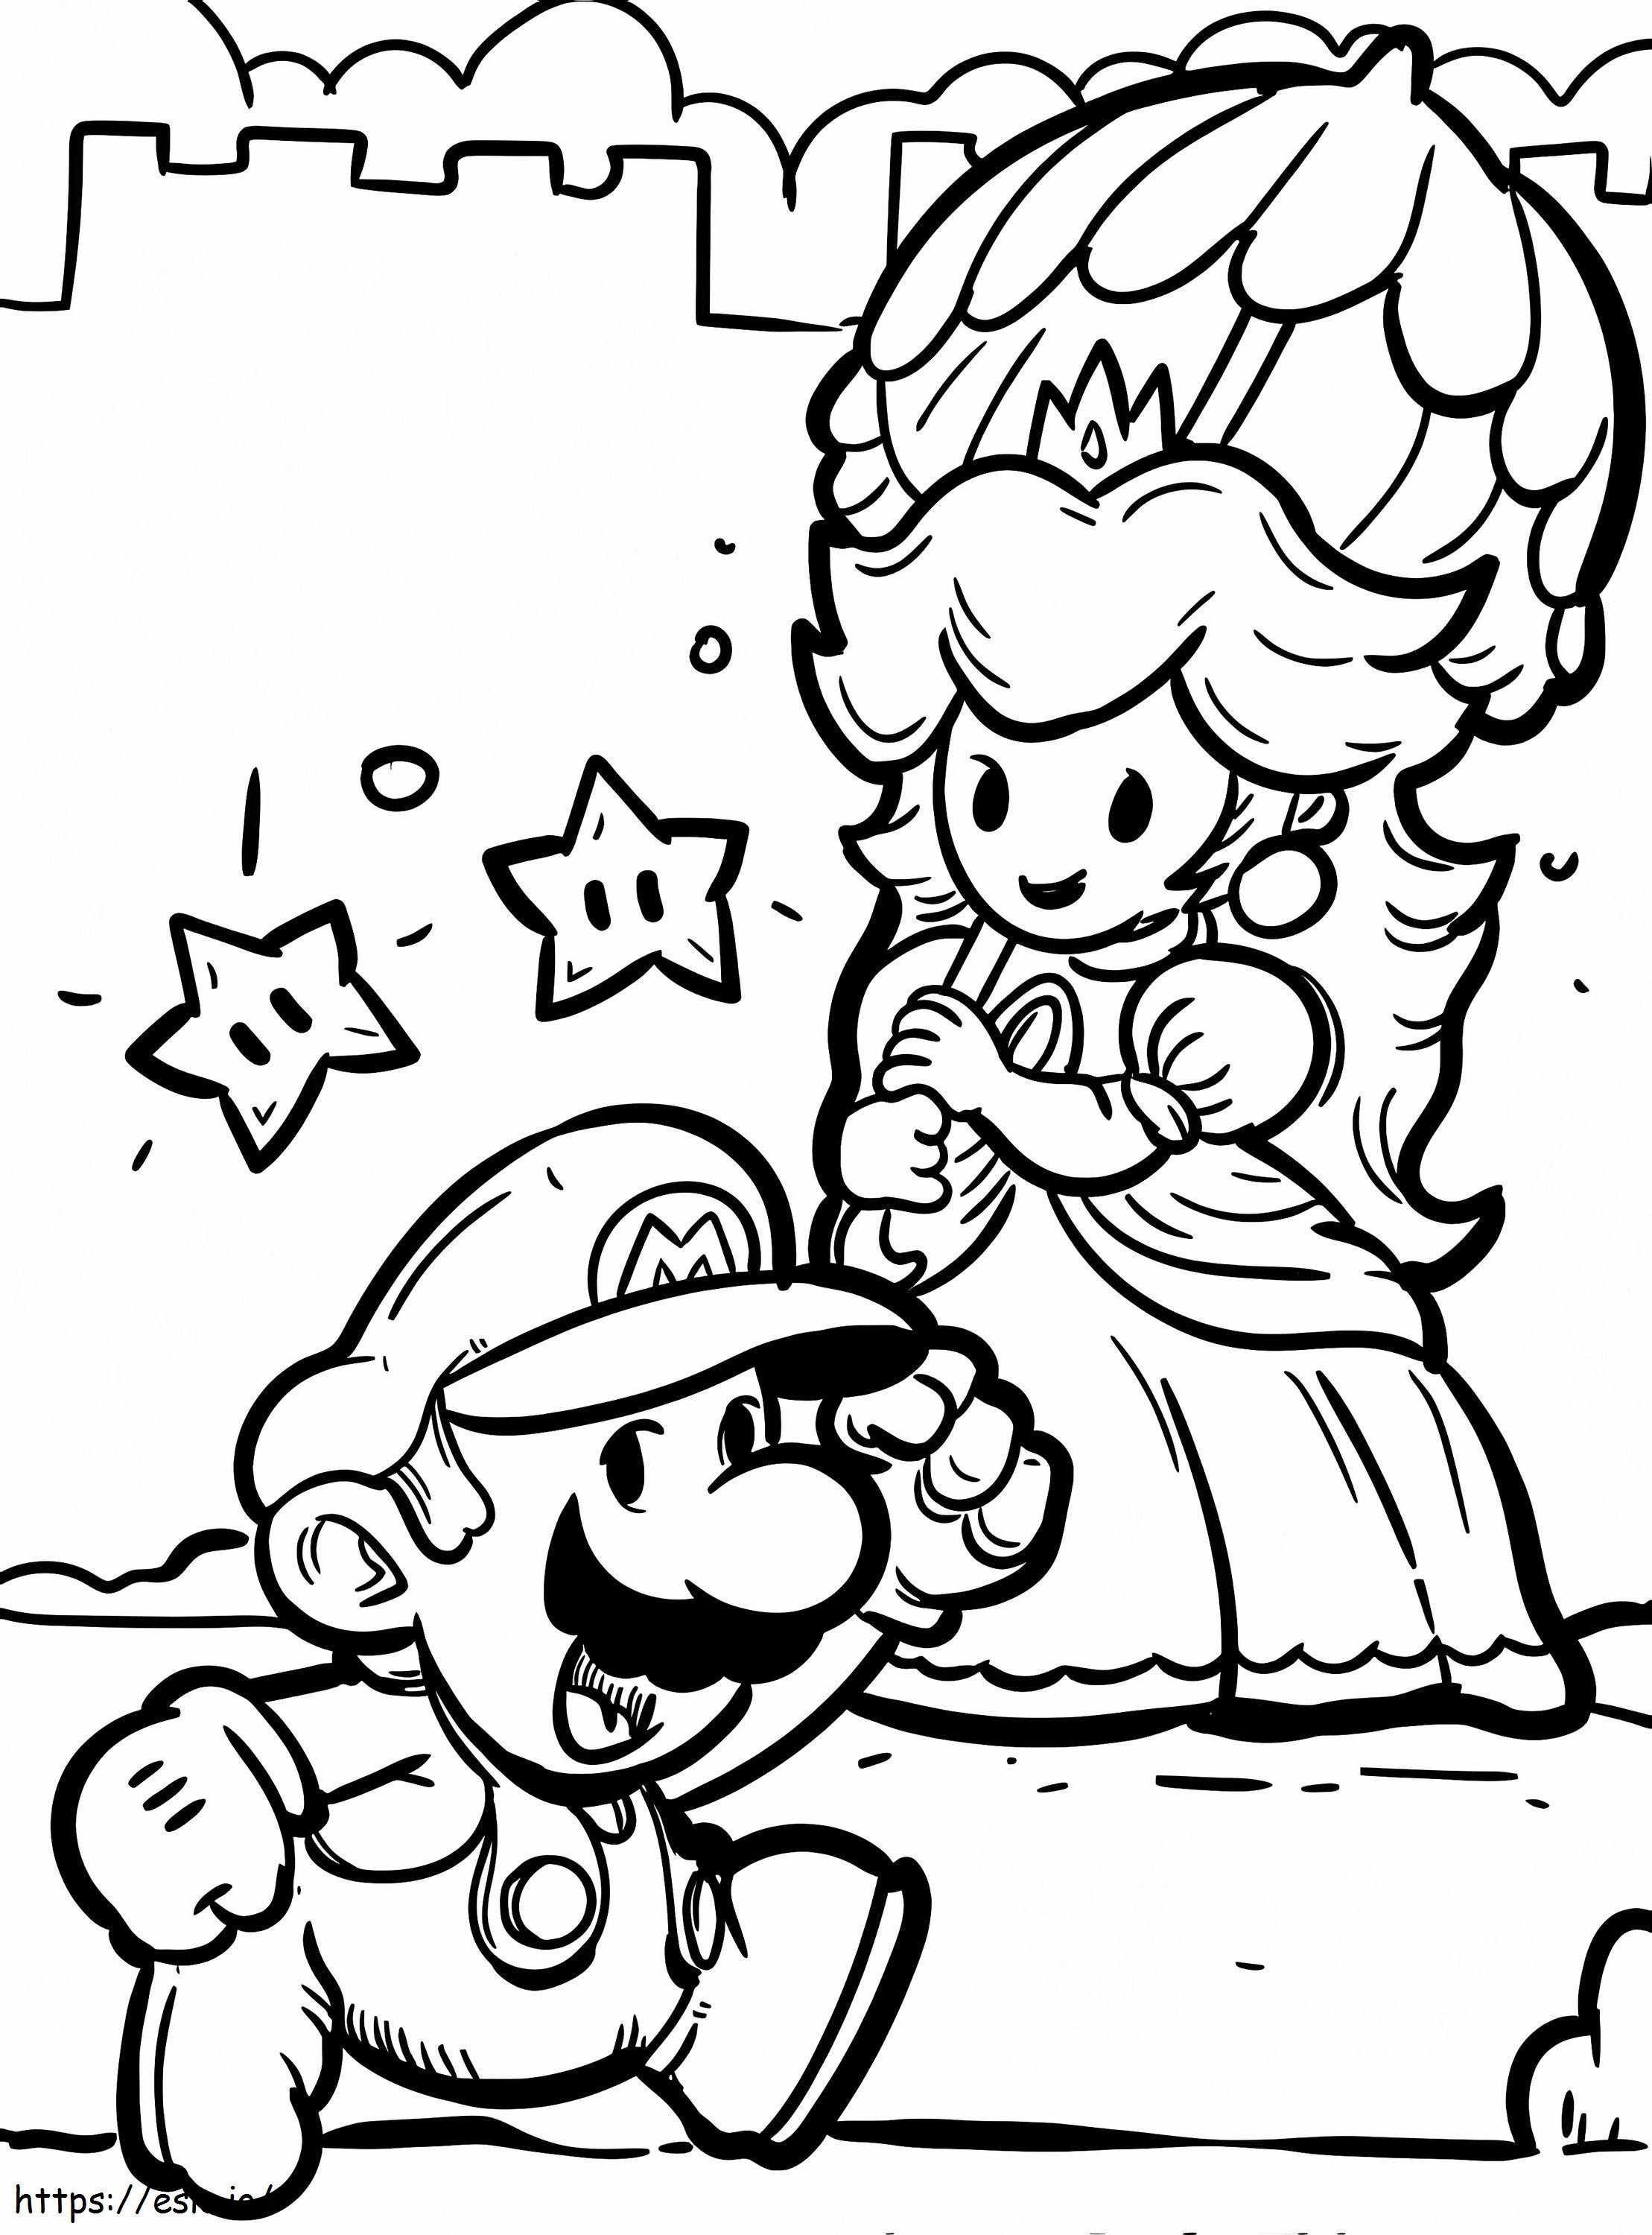 Peach and super mar coloring page